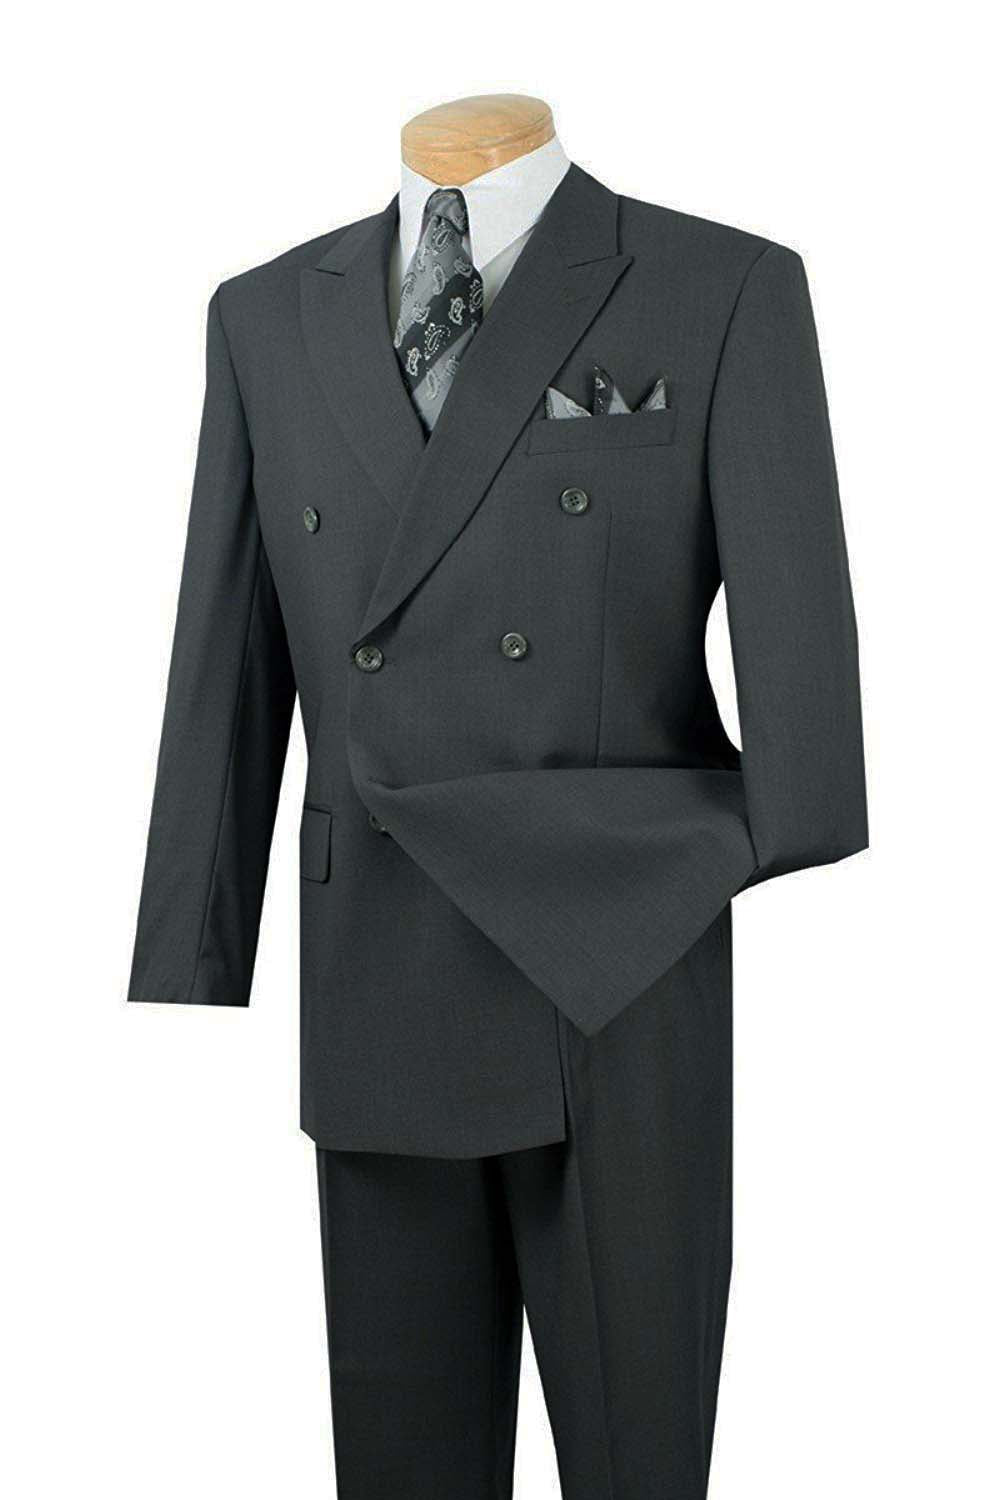 Atlantis Collection - Charcoal Regular Fit Double Breasted 2 Piece Suit